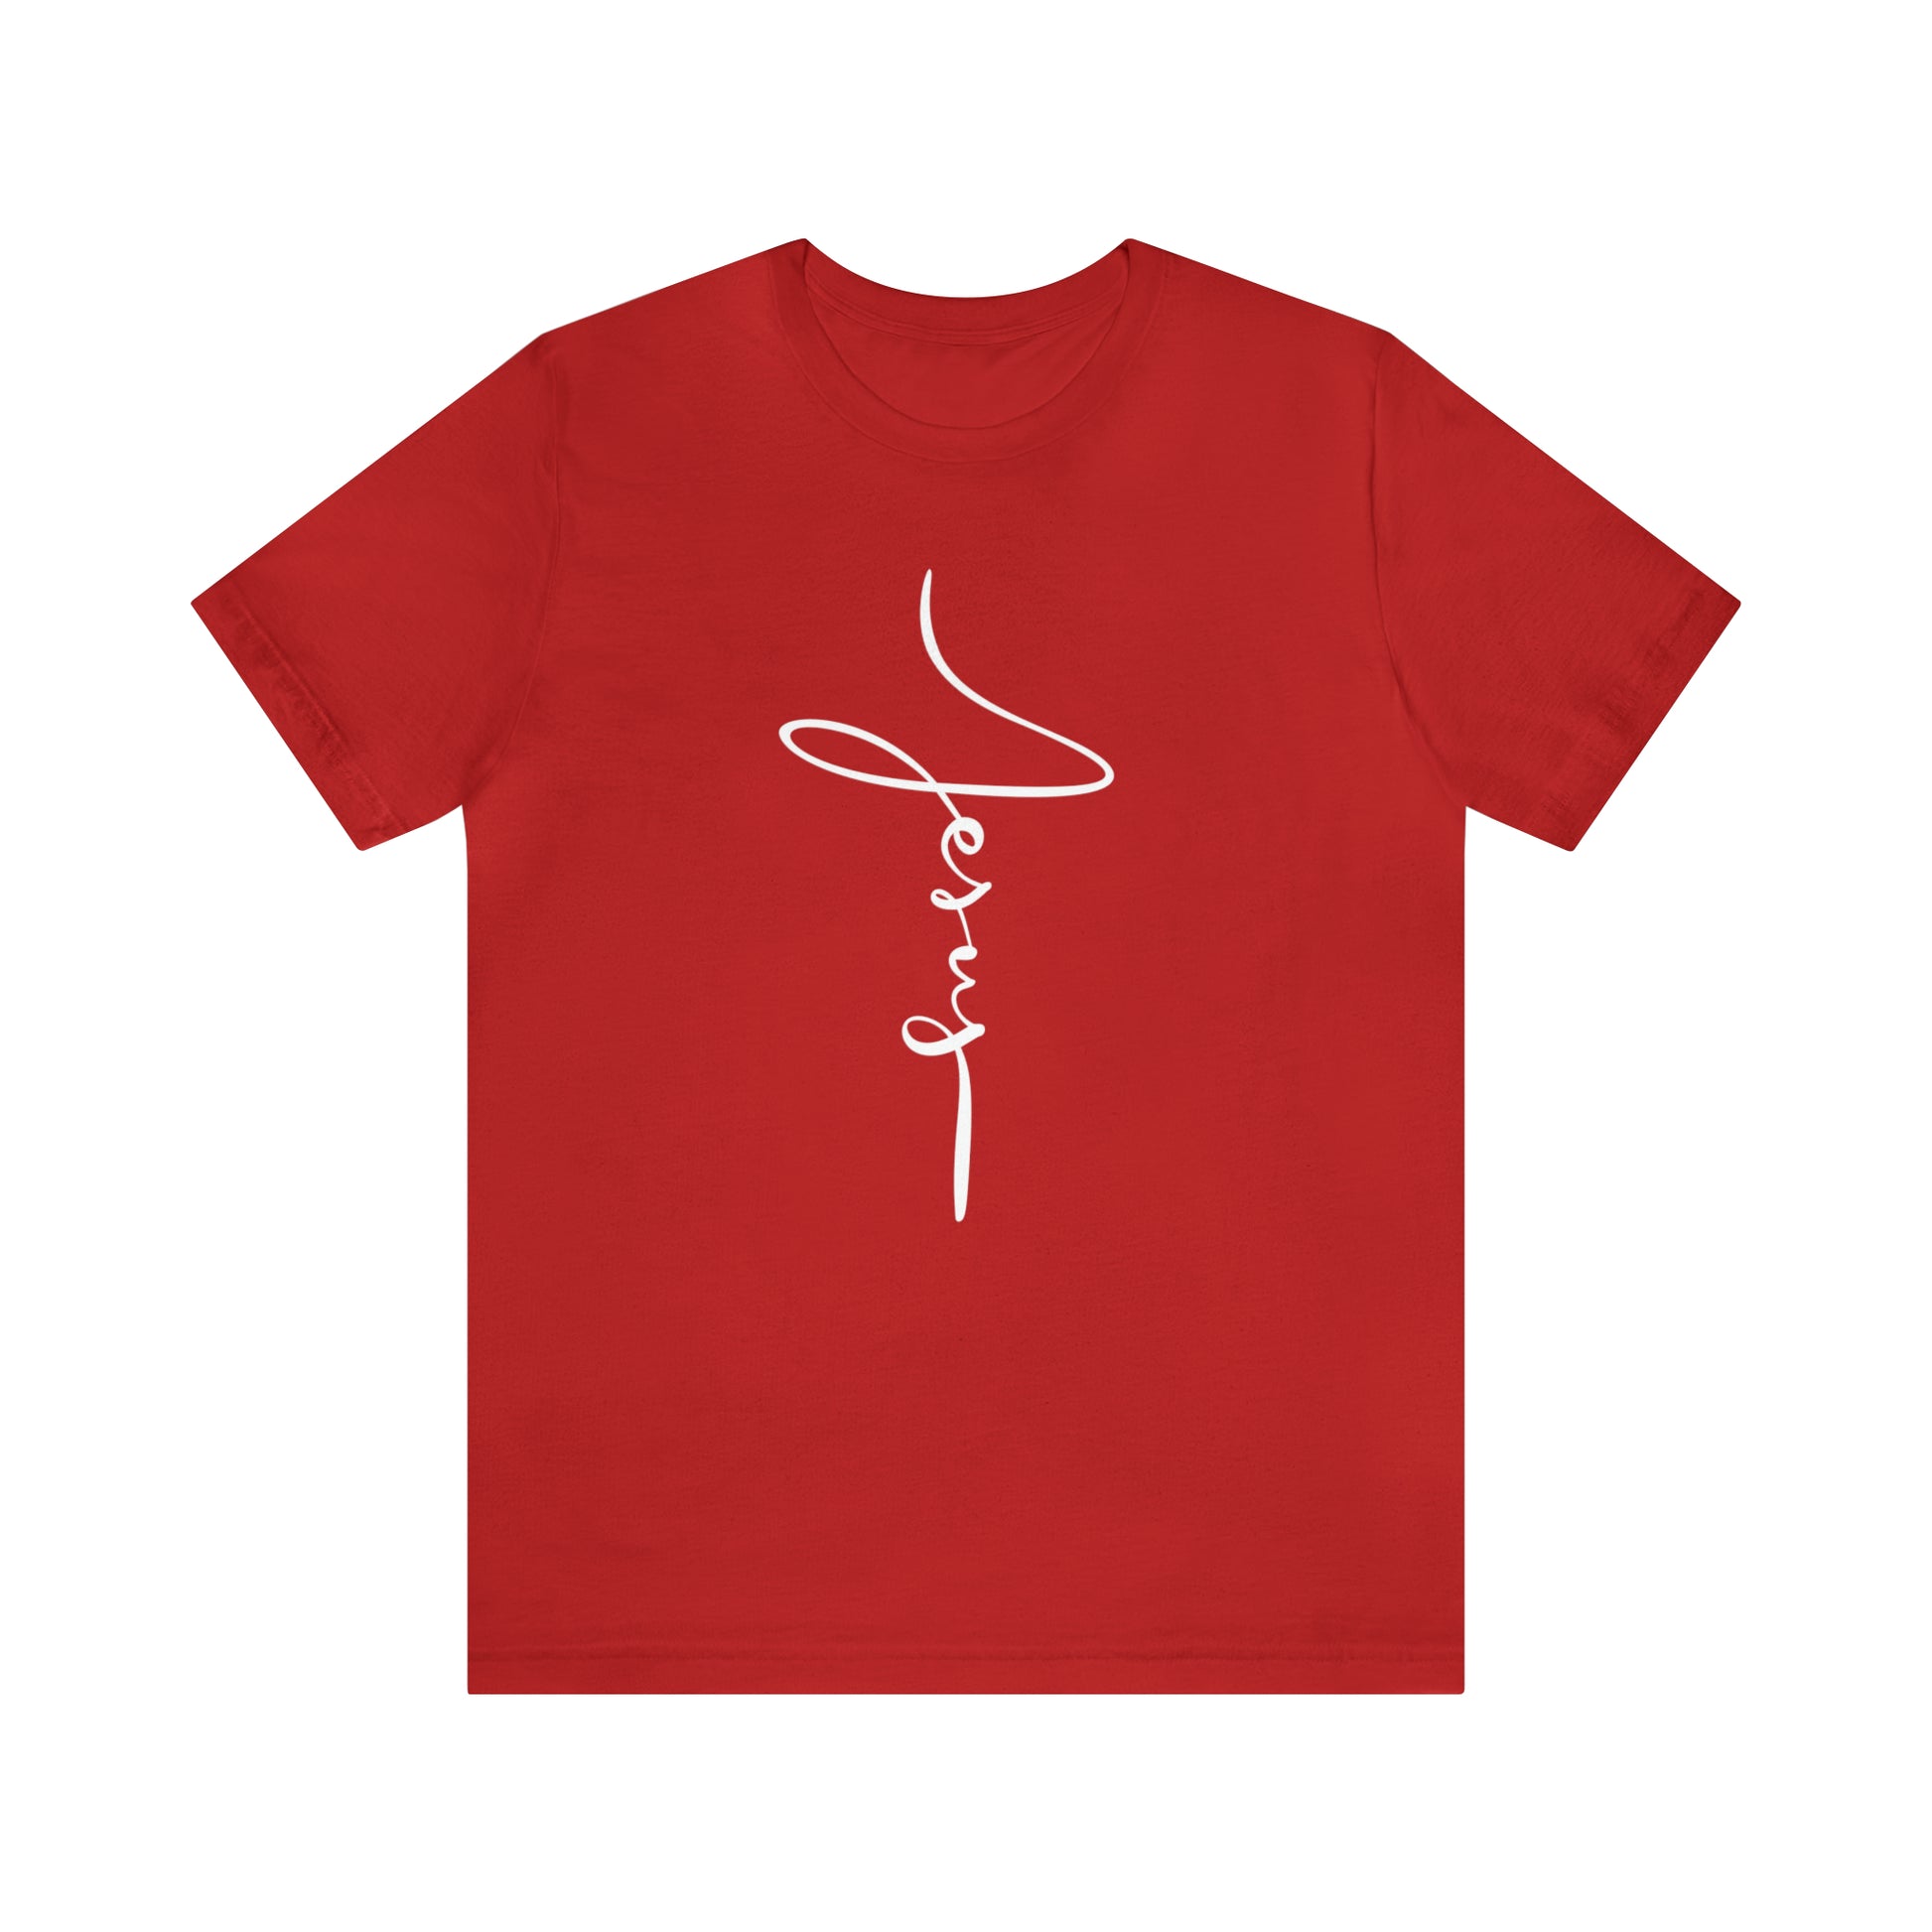 Jesus Cross Christian T-Shirt - Cursive White Font Bright Color Tees - Red on white background